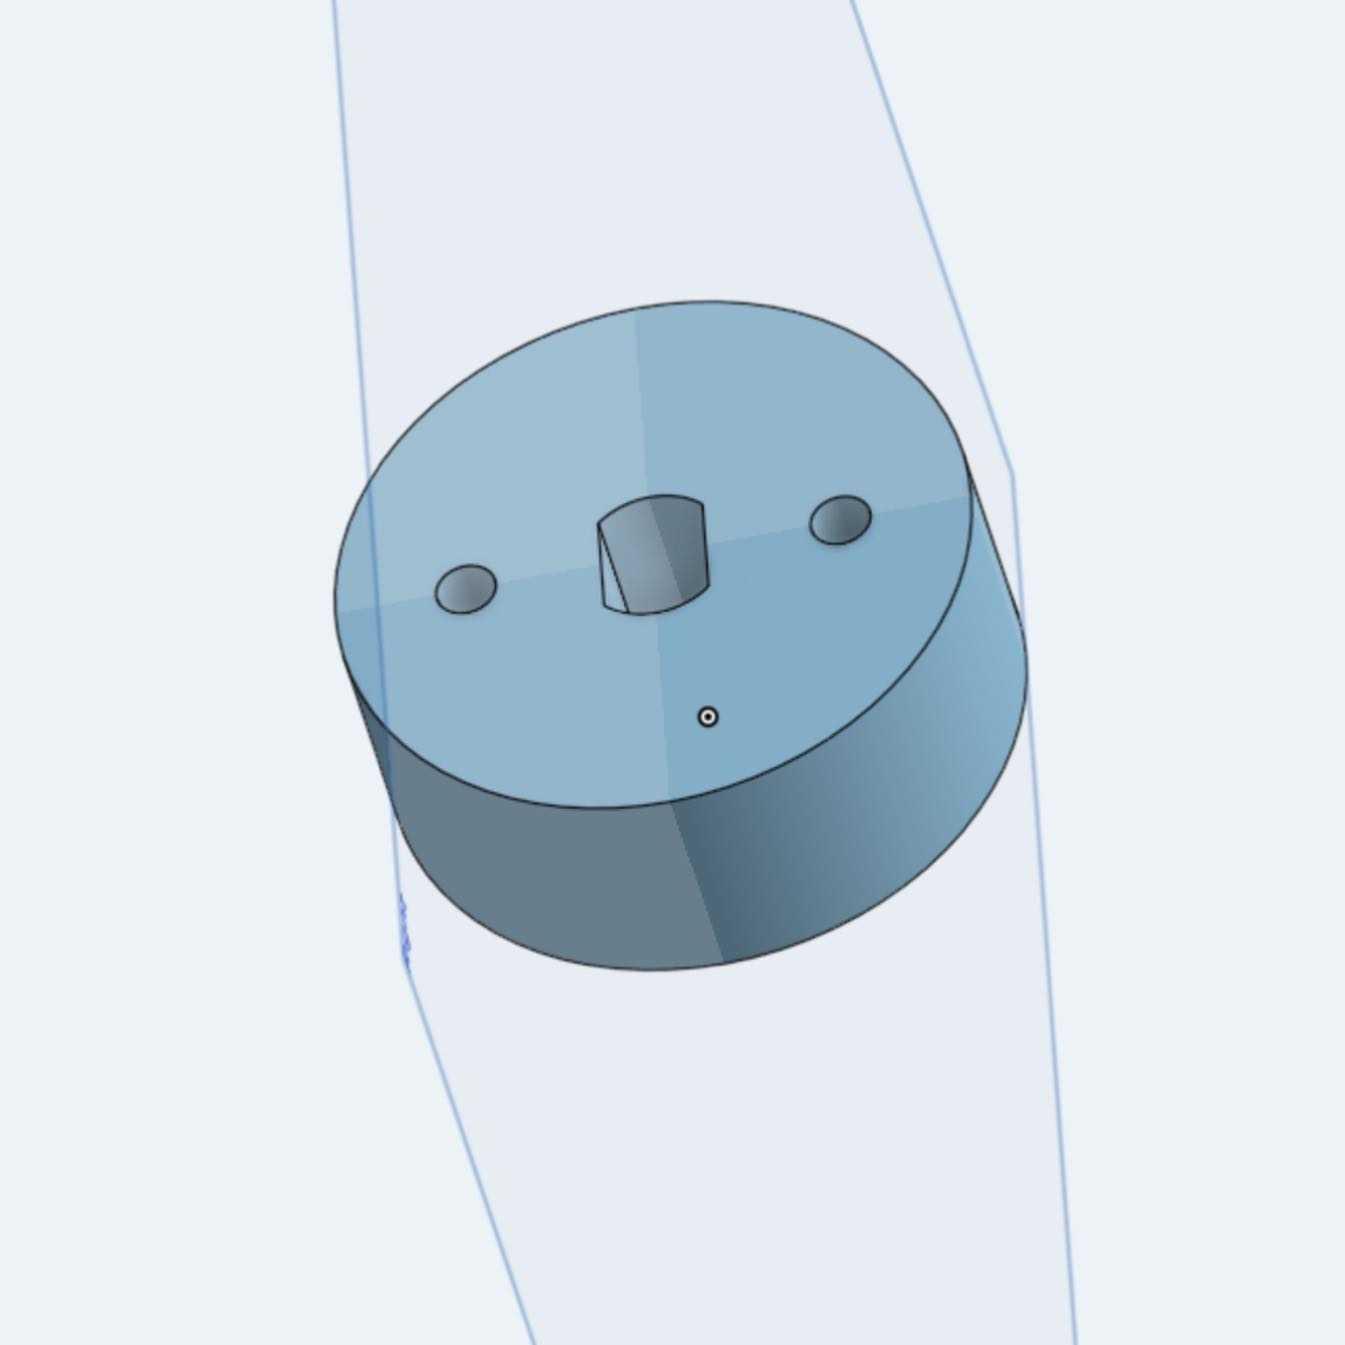 CAD of piece to interface with timer dial